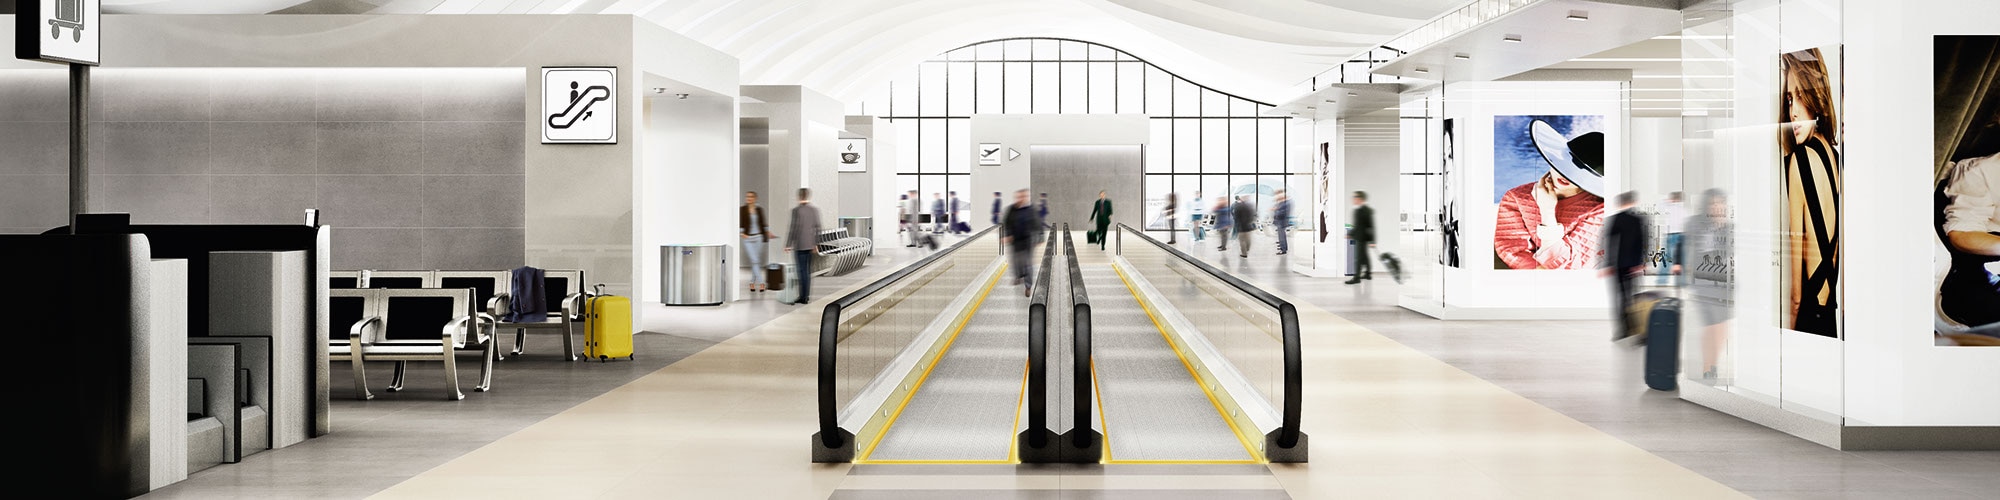 A large airport corridor with two different colors of large format tile on the floor, both monochromatic and chic